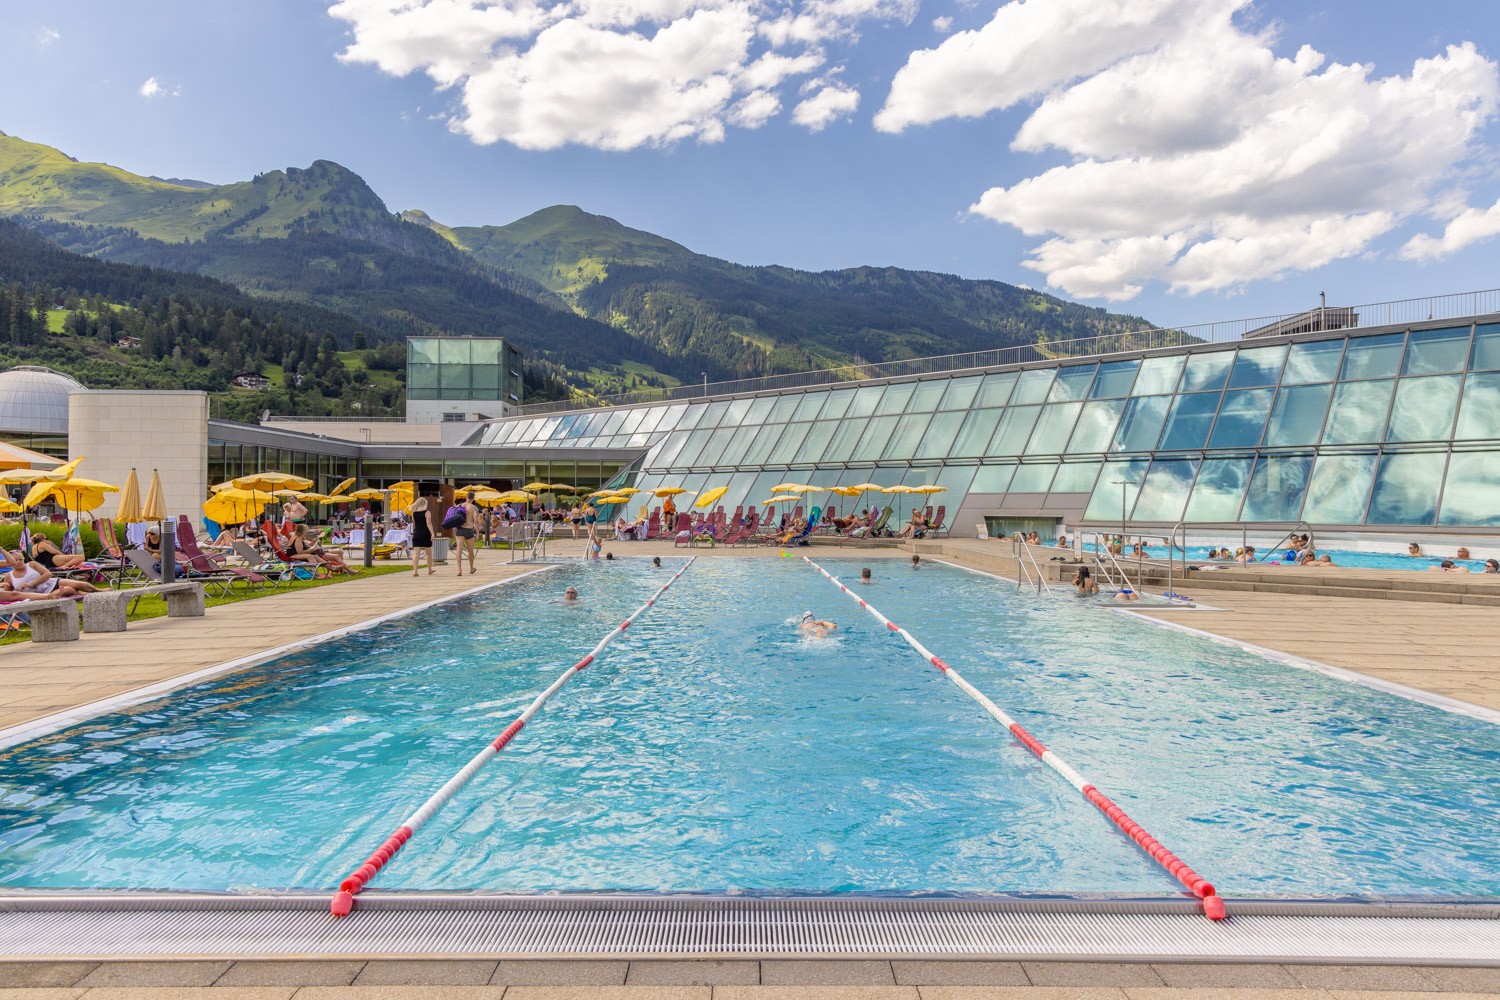 The sports pool at the thermalbath